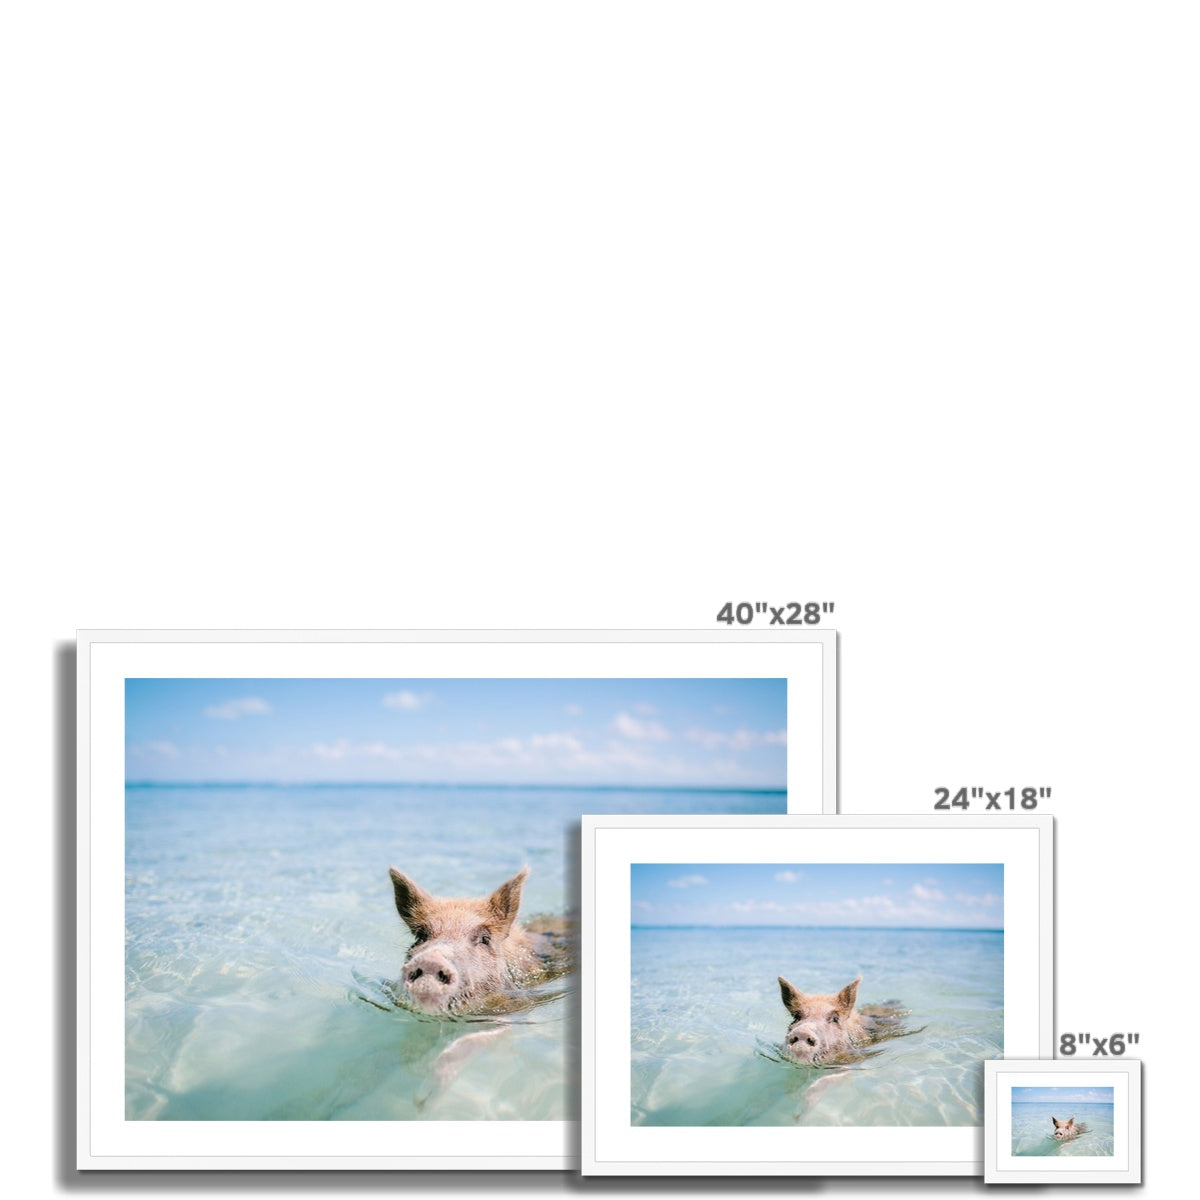 SWIMMING PIG Framed & Mounted Print